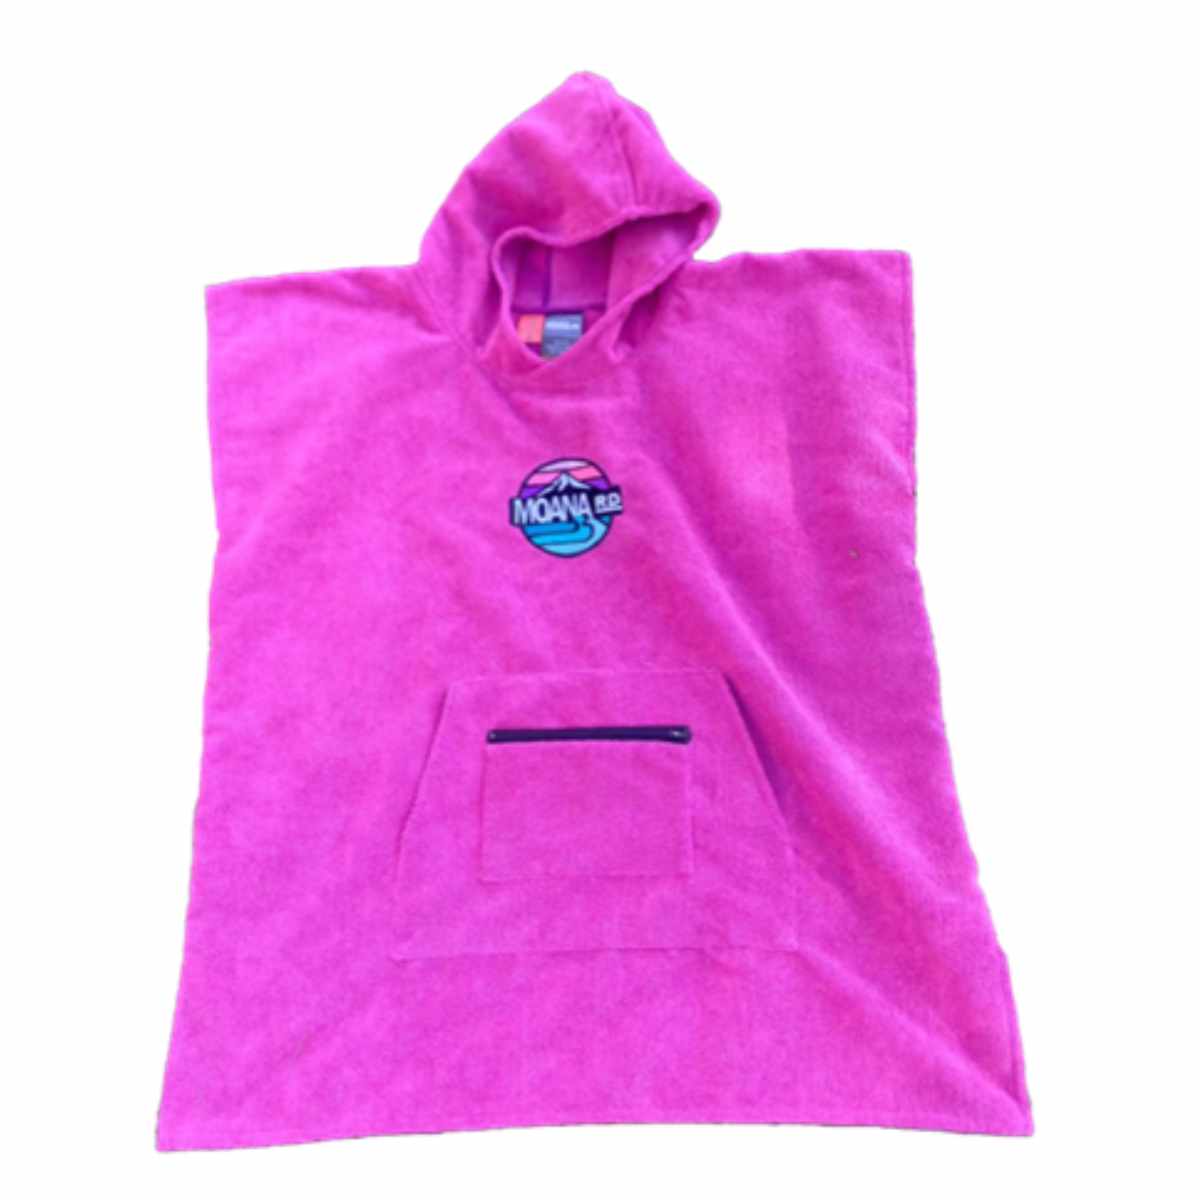 Moana Road Adventure Towel Hoodie (Childrens) available in Black and Pink